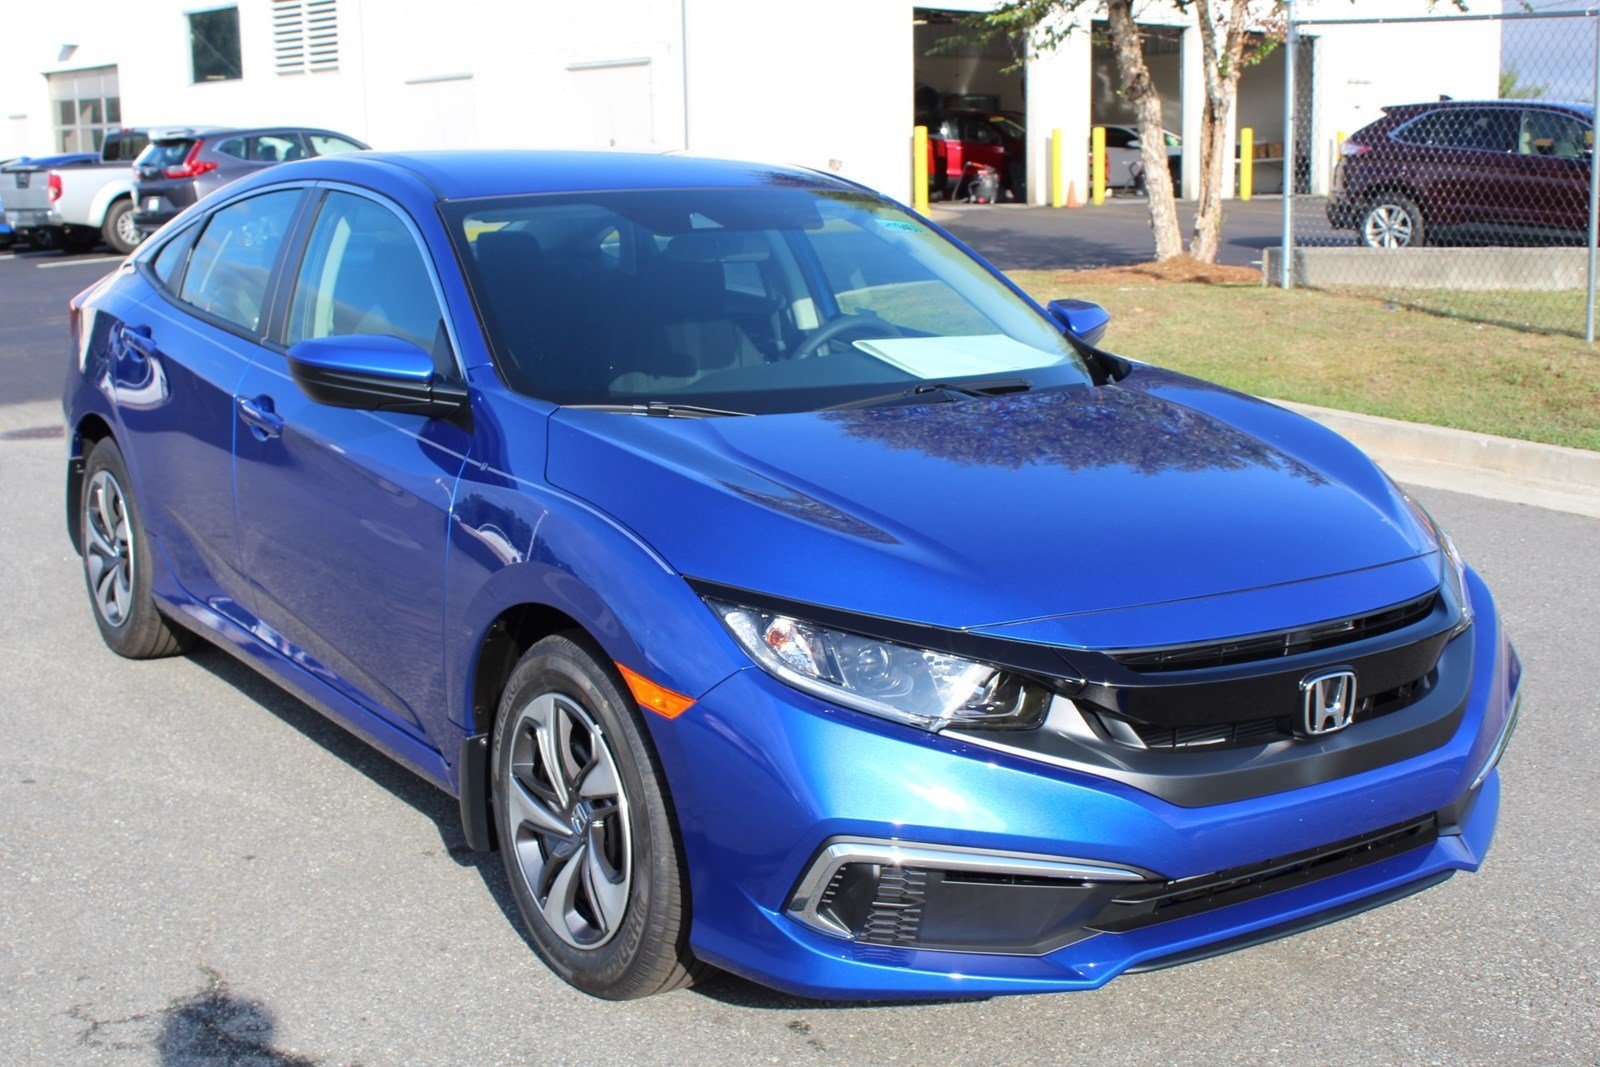 New 2019 Honda Civic LX 4dr Car in Milledgeville H19460